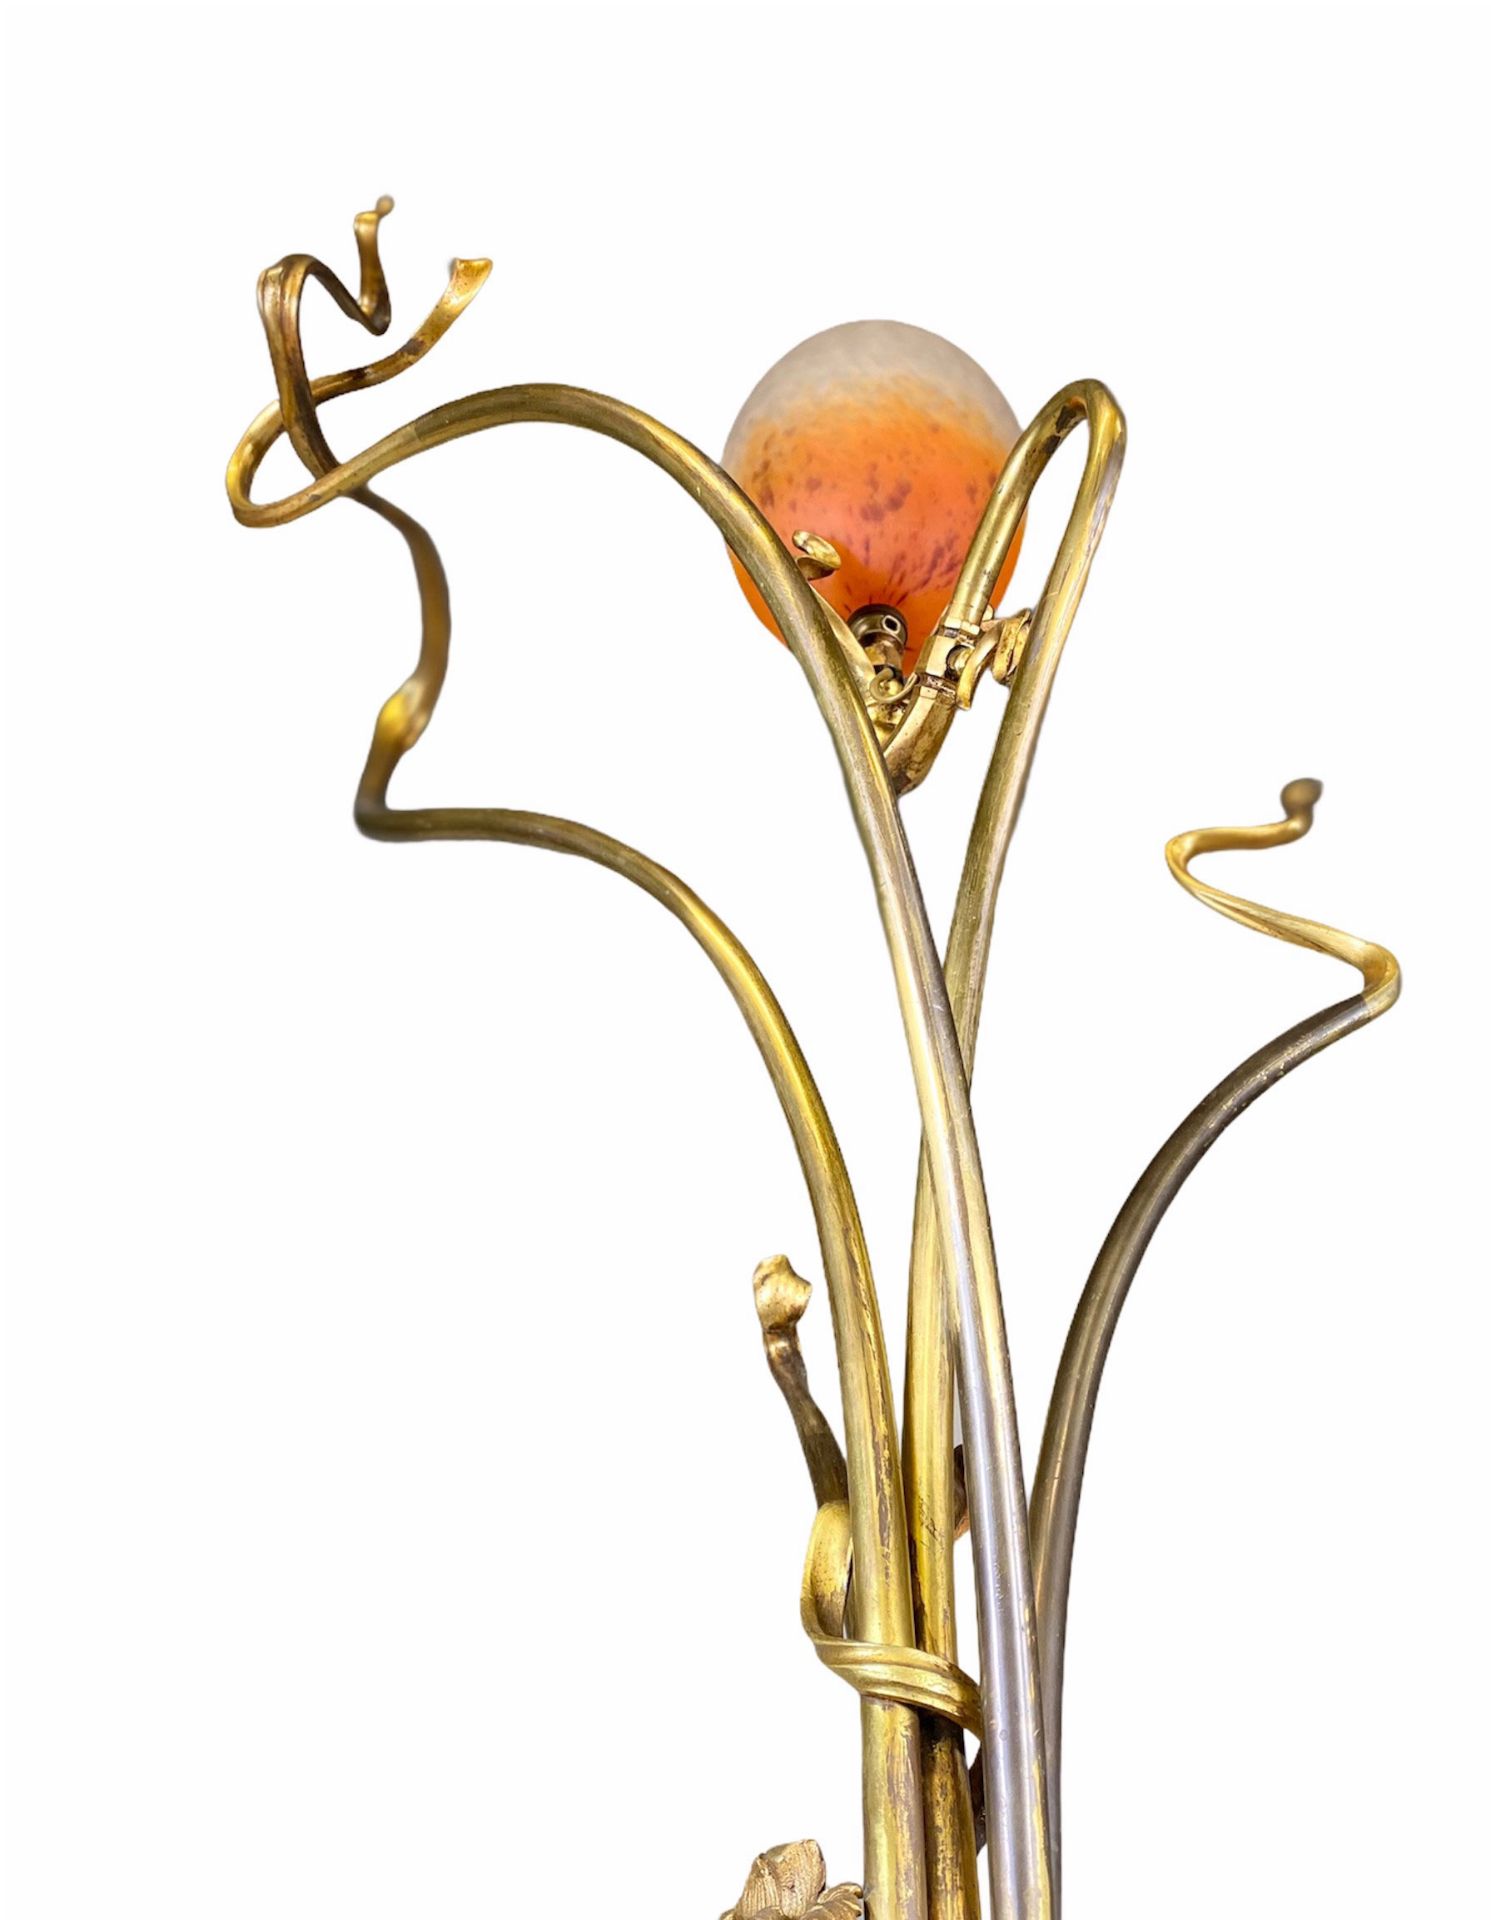 Victor Horta (attributed to) Imposing living room lamp with vegetable base in bronze. "added bobeche - Image 4 of 7